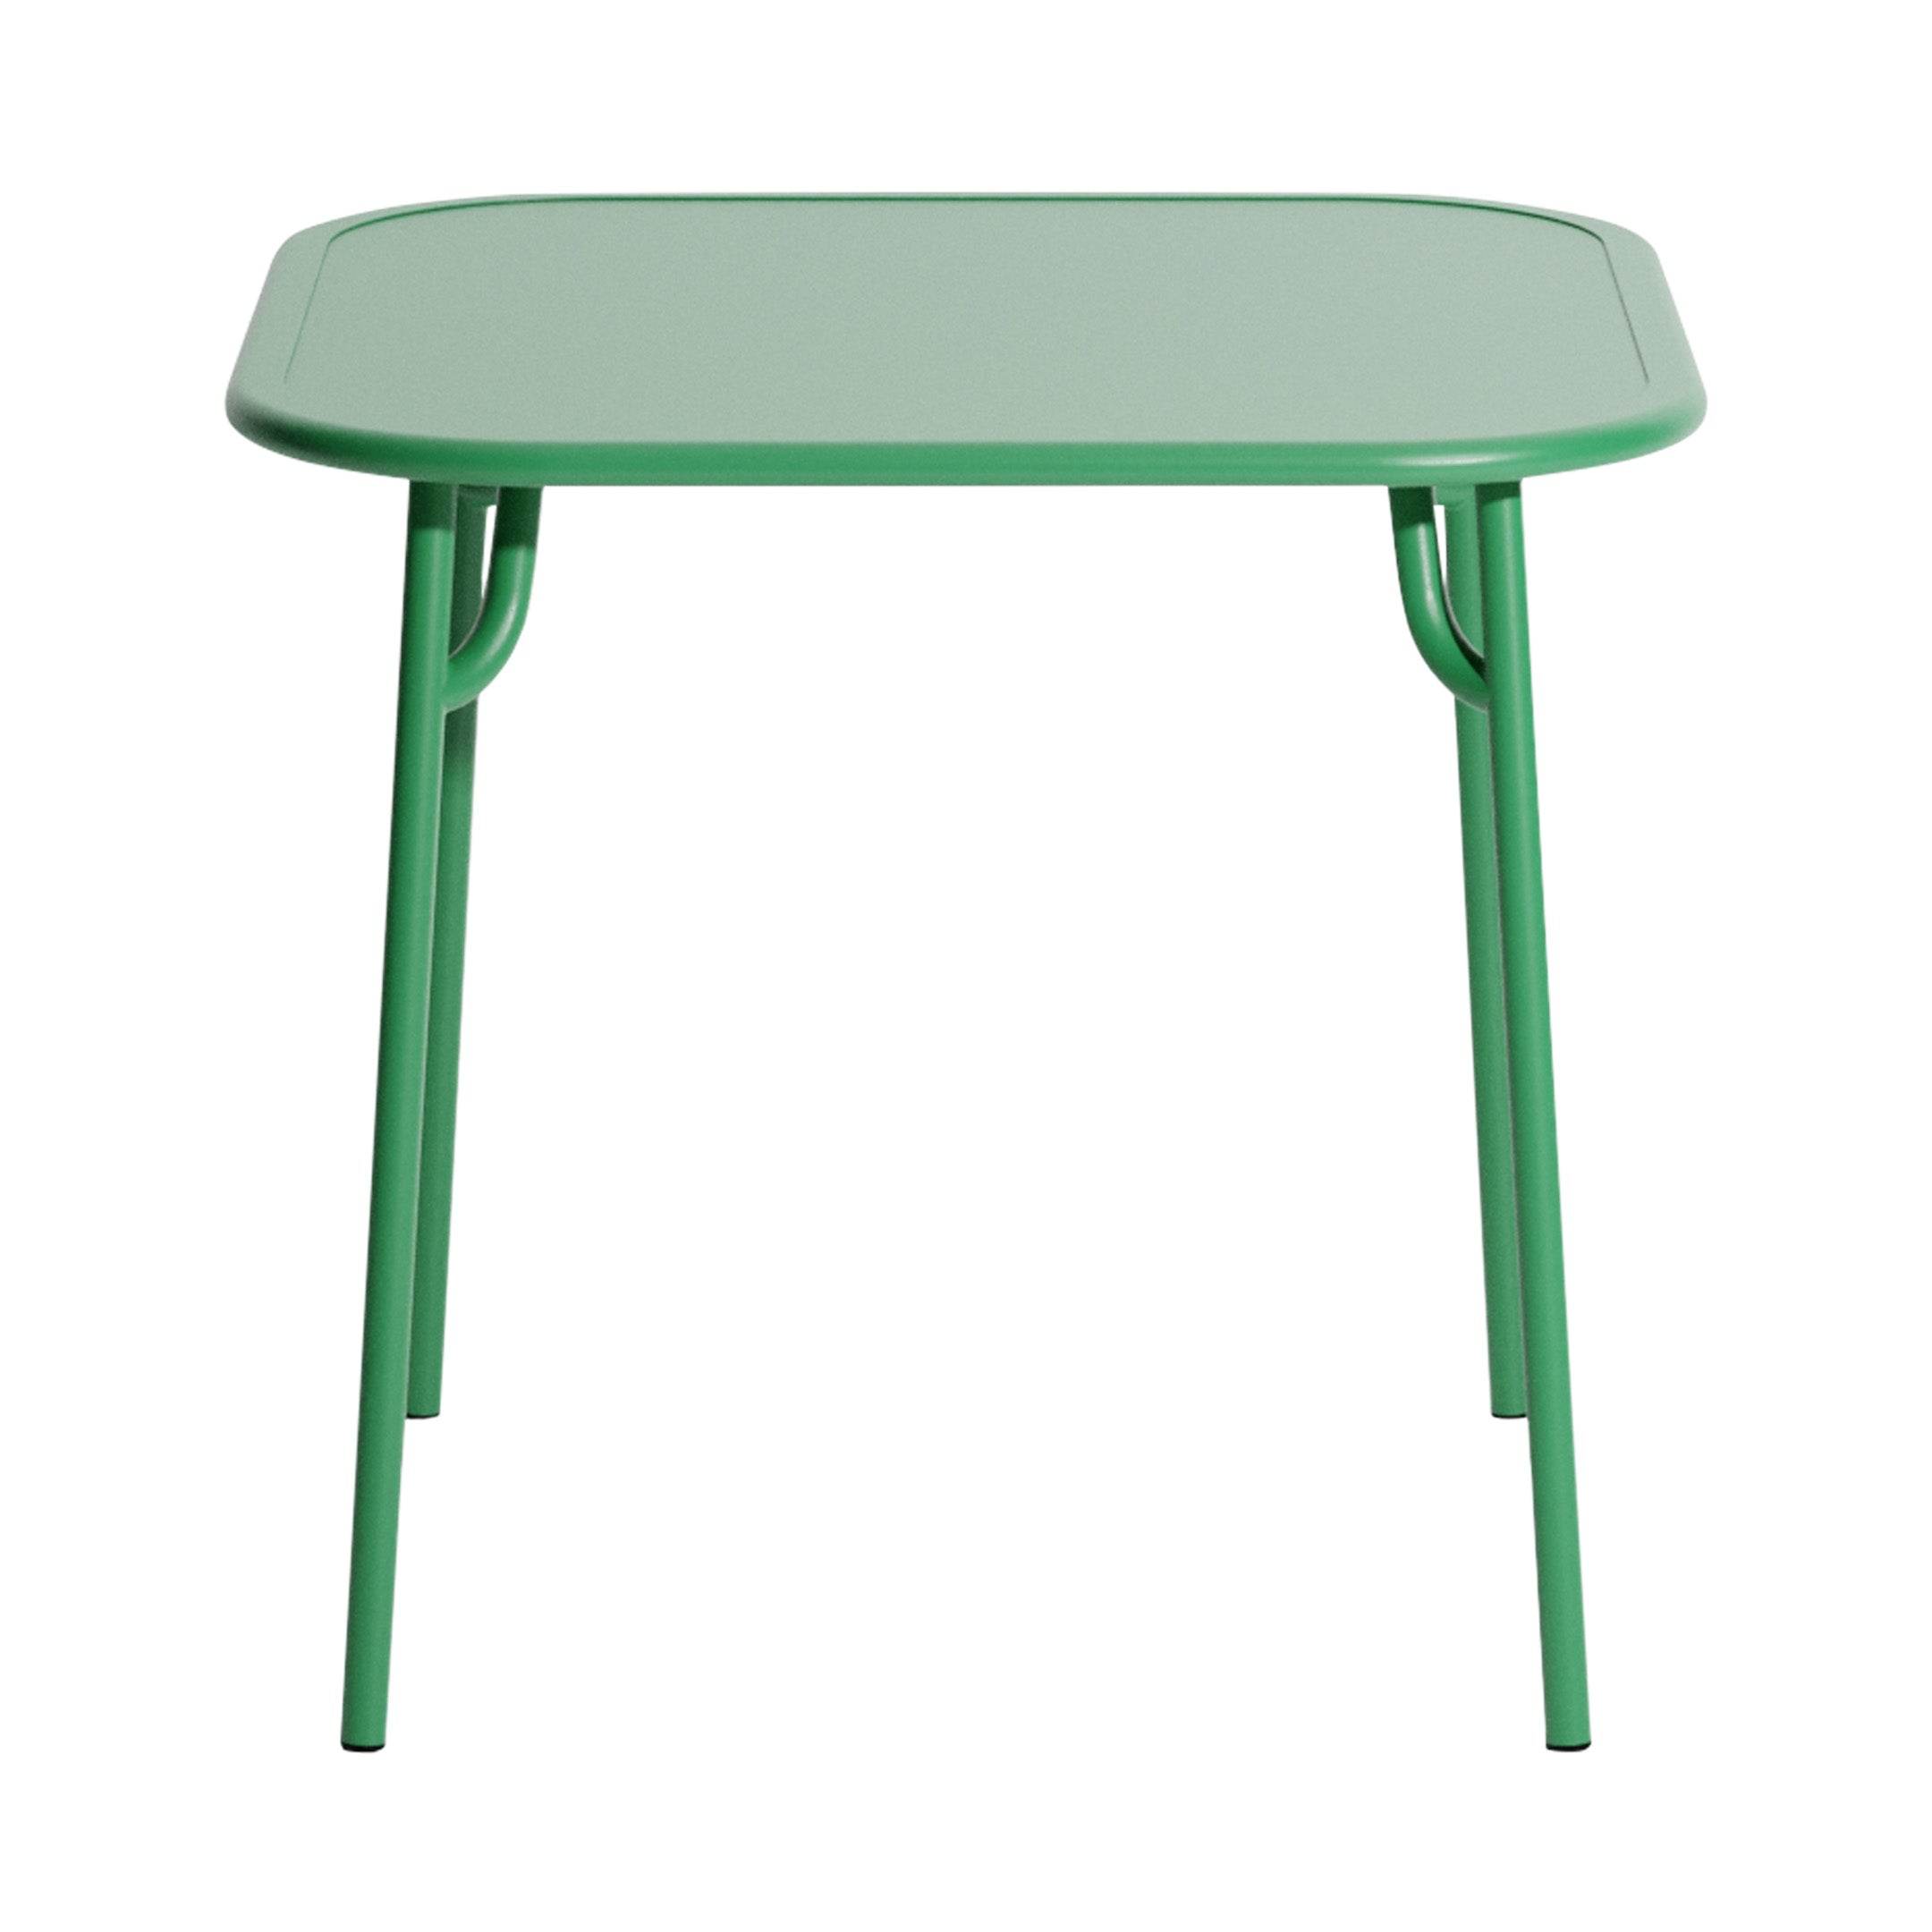 Week-End Square Dining Table: Mint Green